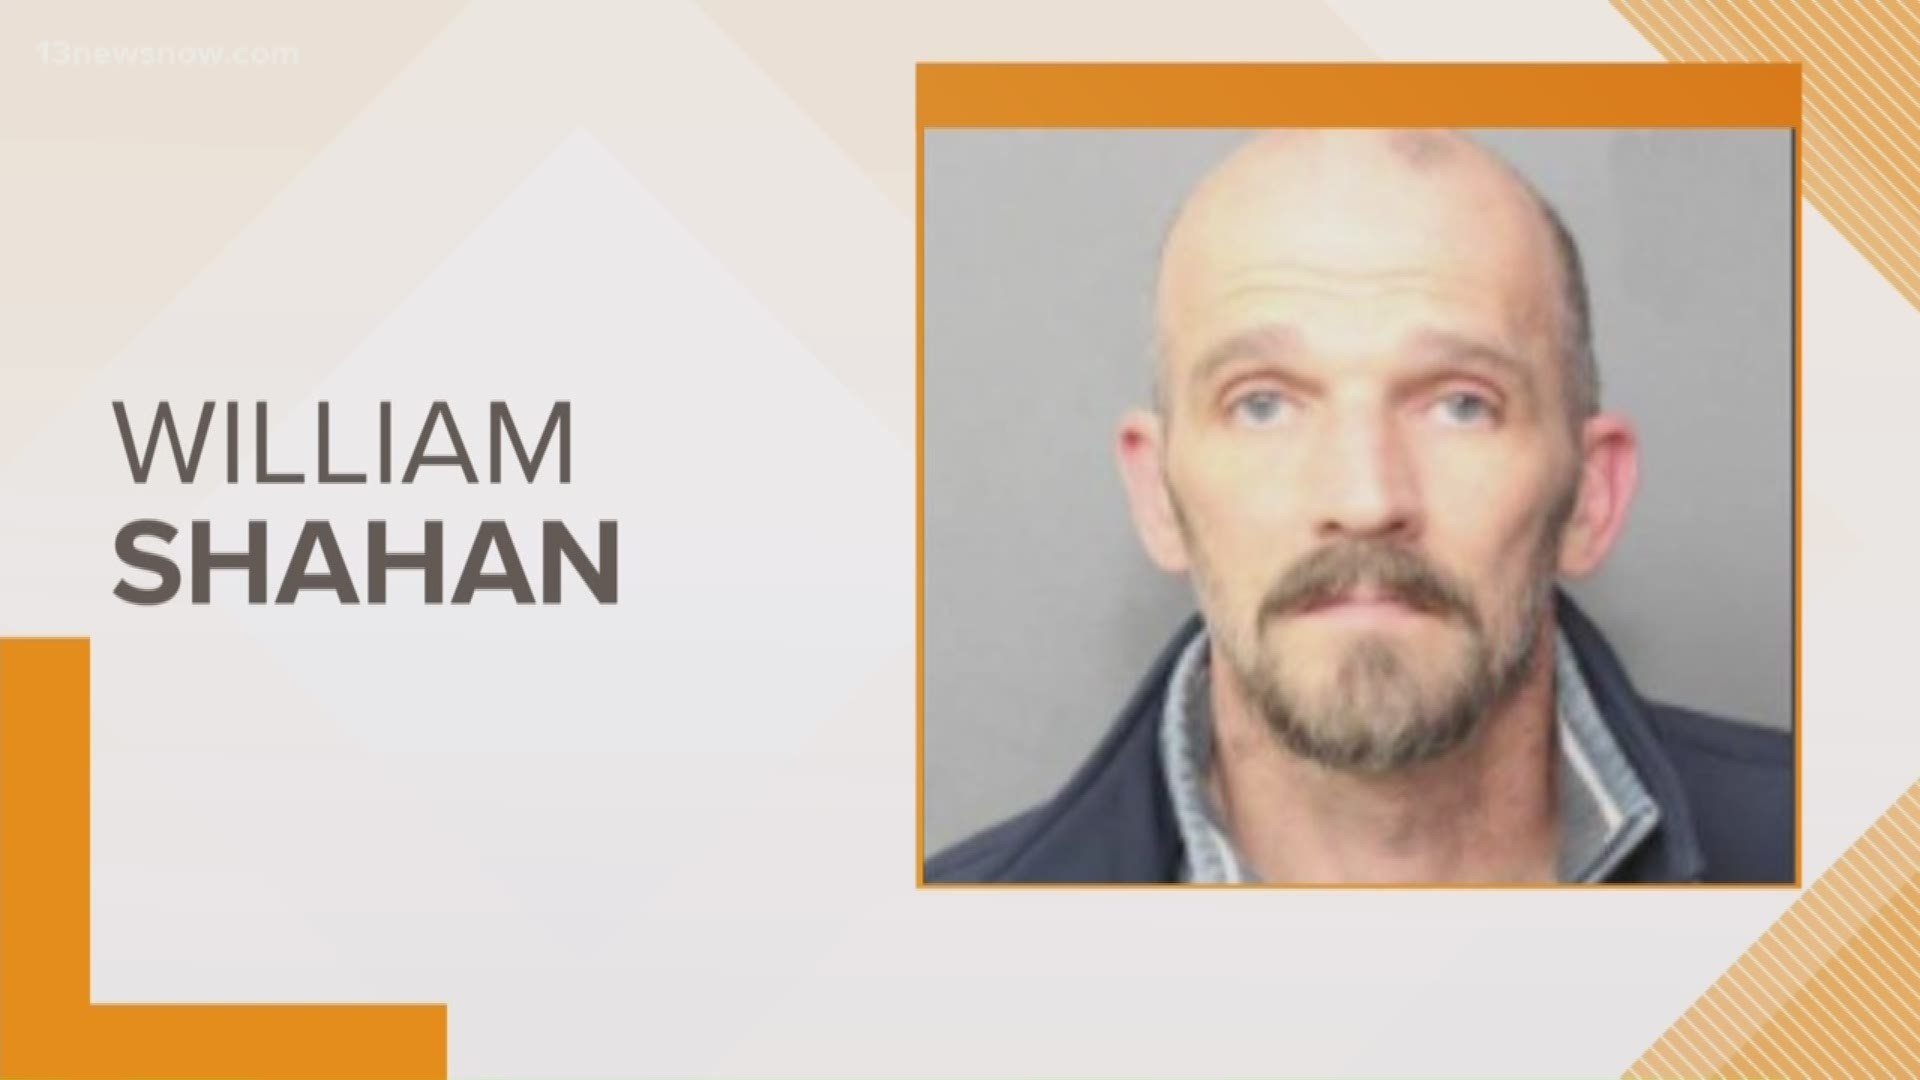 William G. Shahan, 42, is charged with first-degree murder in the shooting death of 46-year-old Clifford Duty III.